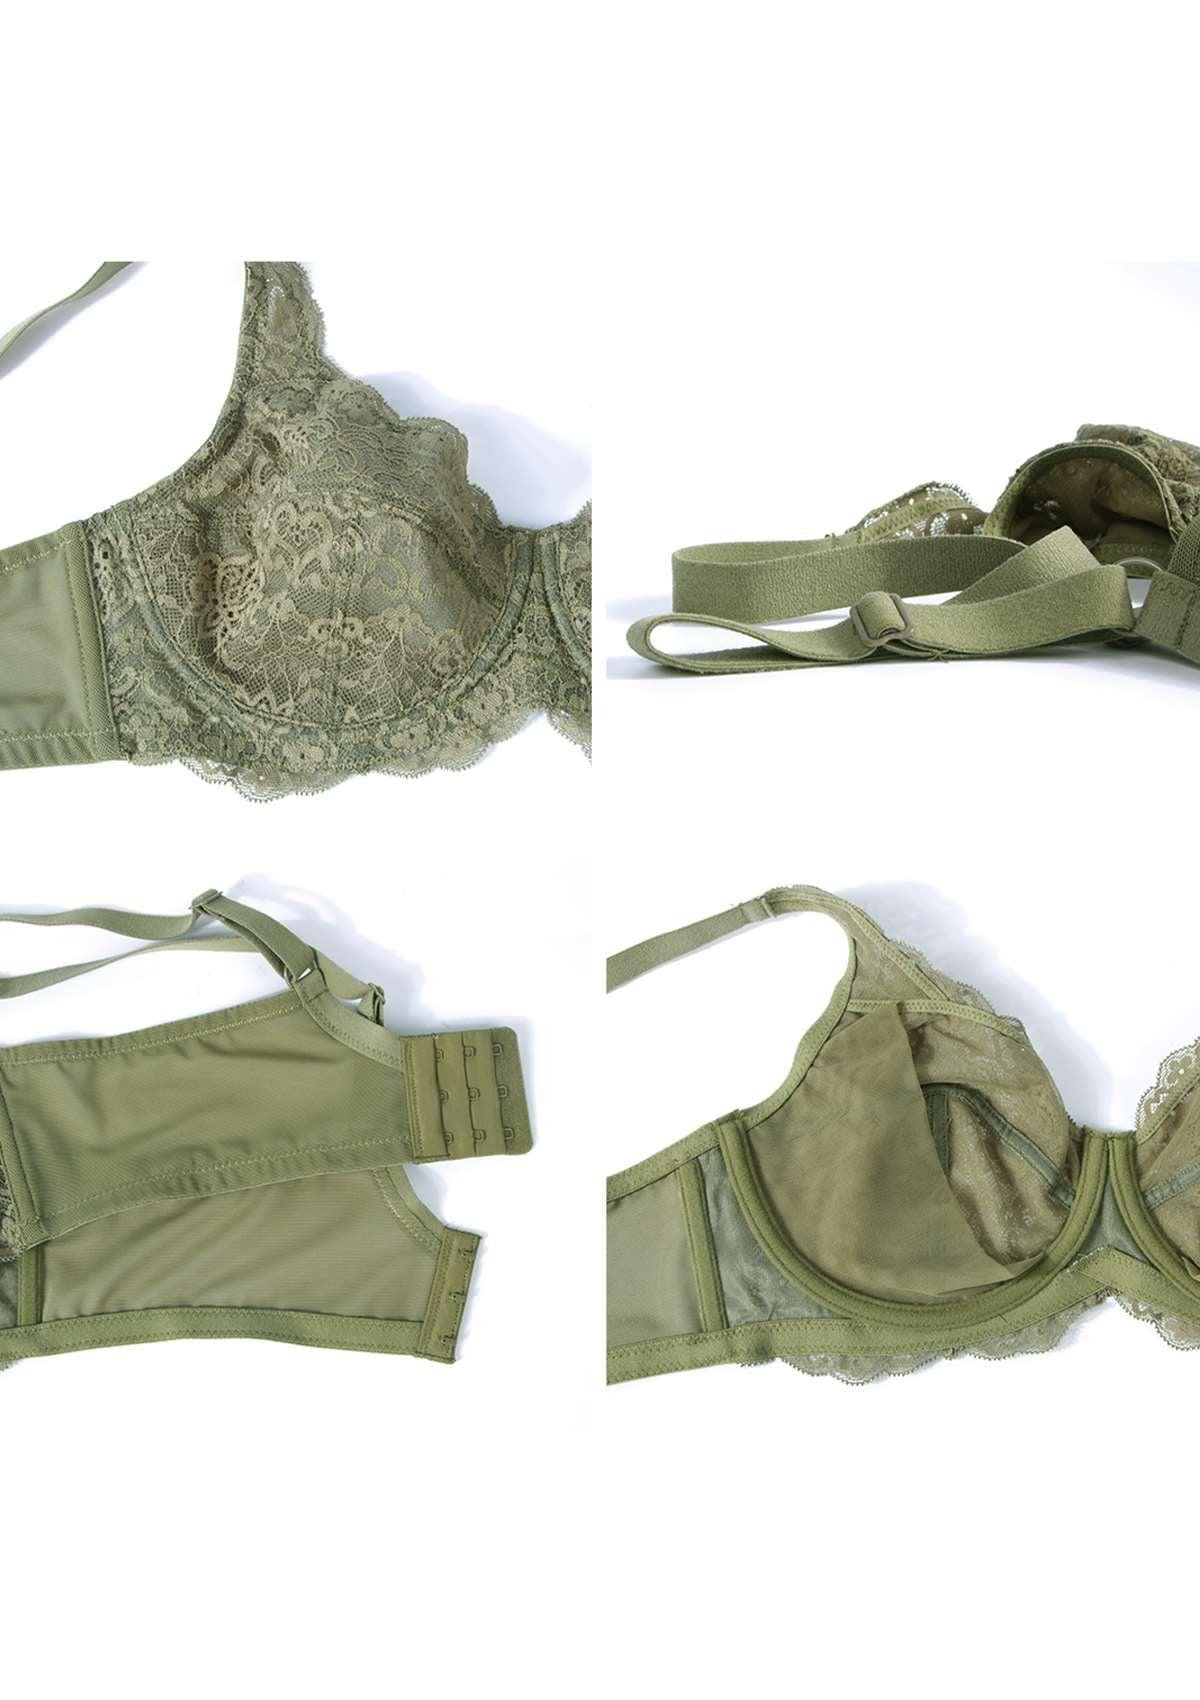 HSIA All-Over Floral Lace Unlined Bra: Minimizer Bra For Heavy Breasts - Dark Green / 40 / DDD/F